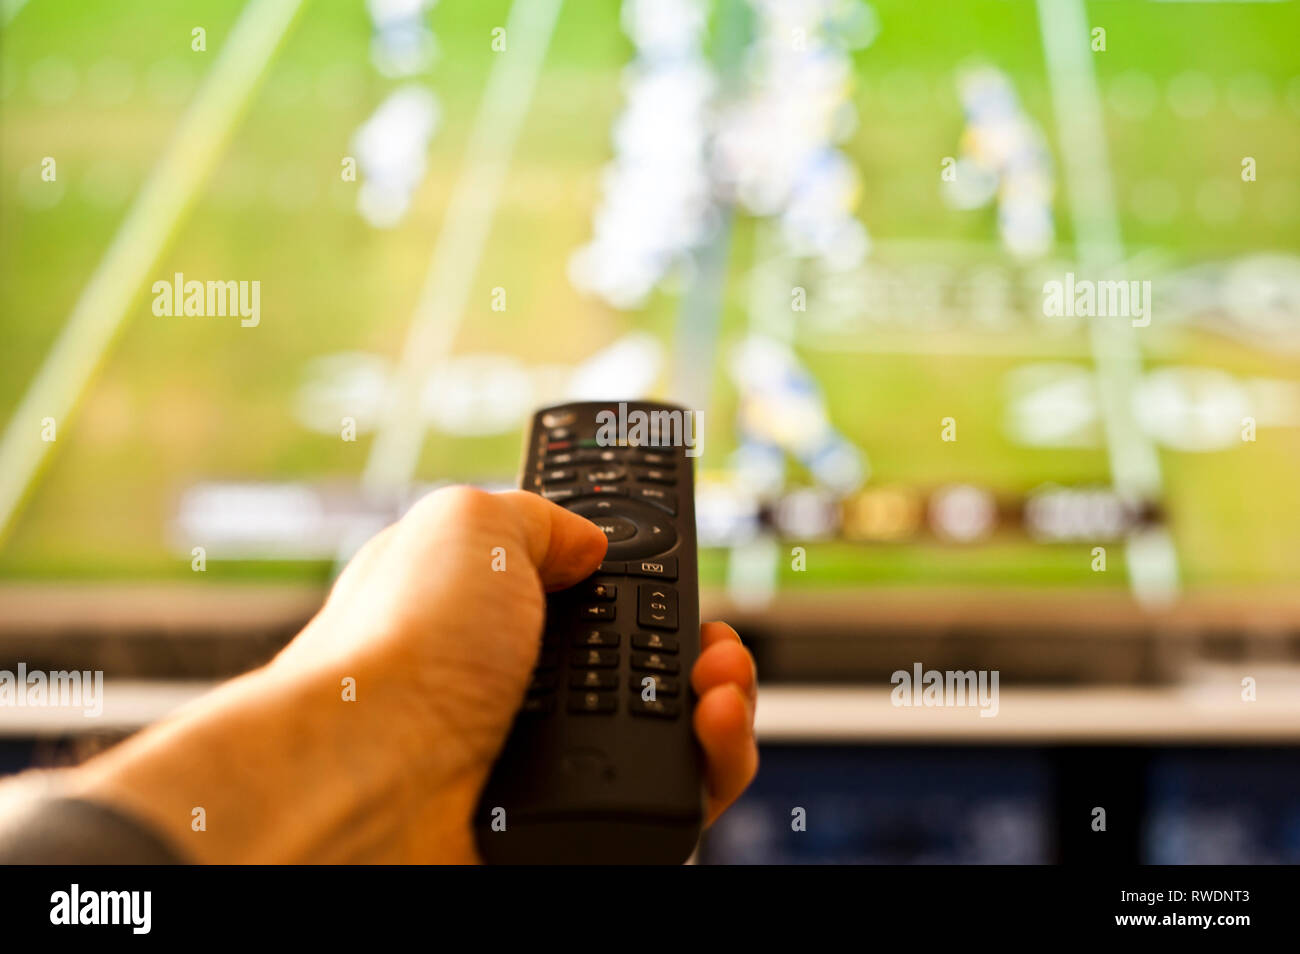 hand holding a remote control in front of the tv screen Stock Photo